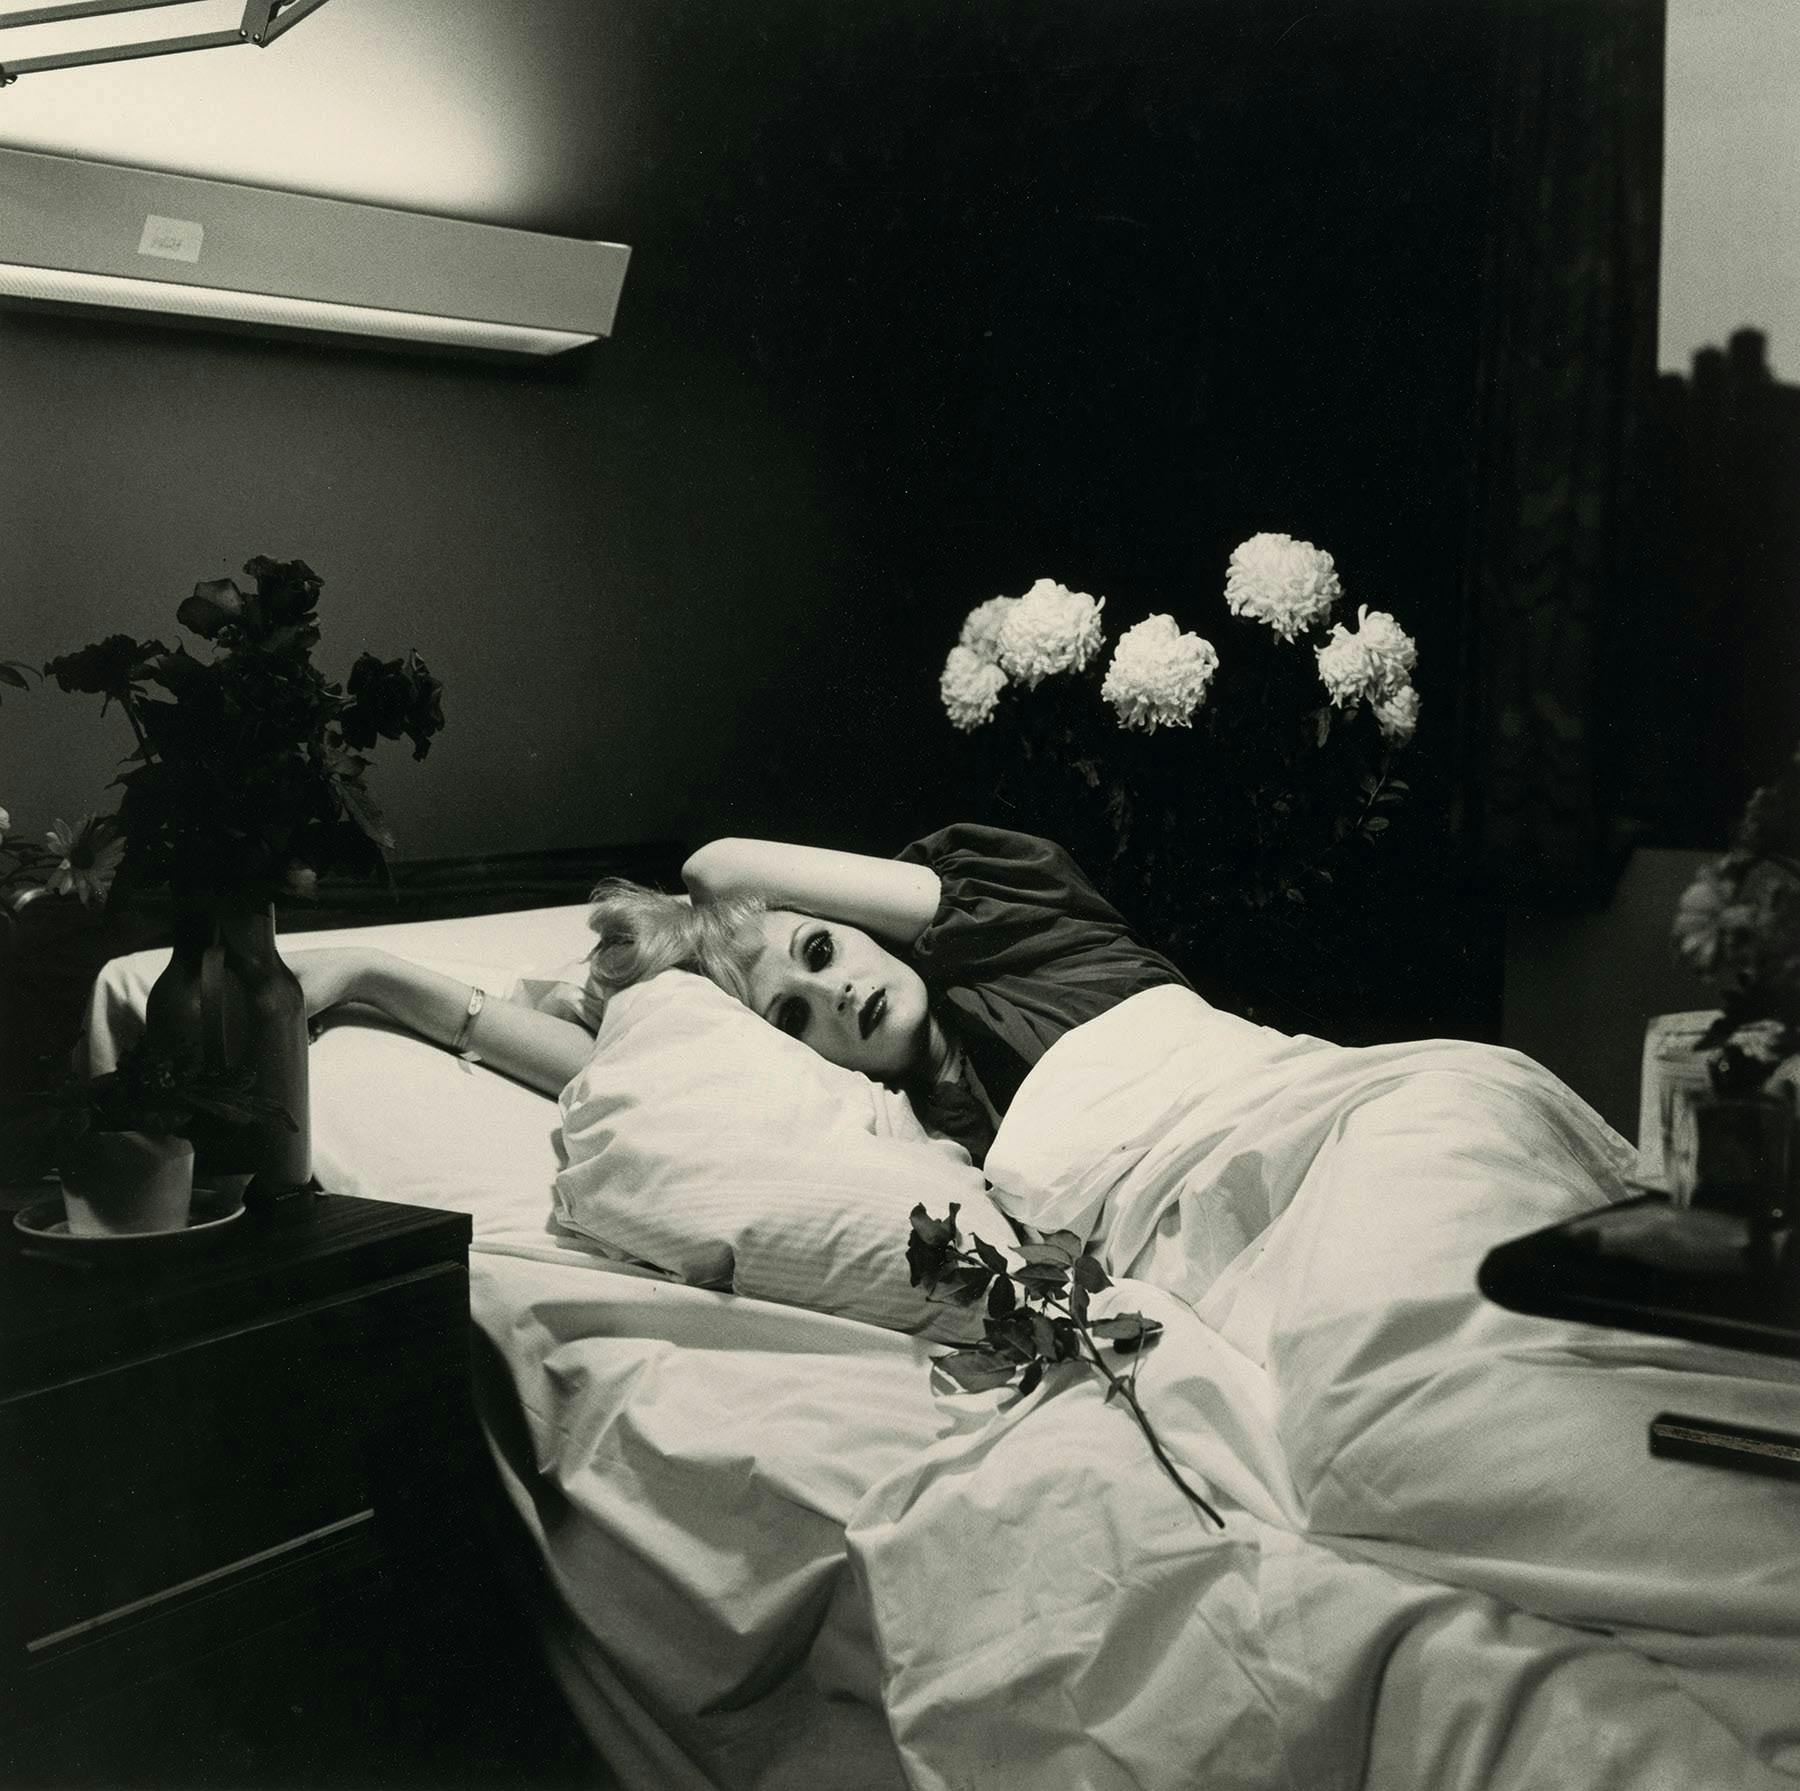 l2016.66.3 hujar peter (1934-1987) candy darling on her deathbed w3938 150994c photograph collection of ronay and richard menschel clinic person human bed furniture indoors room